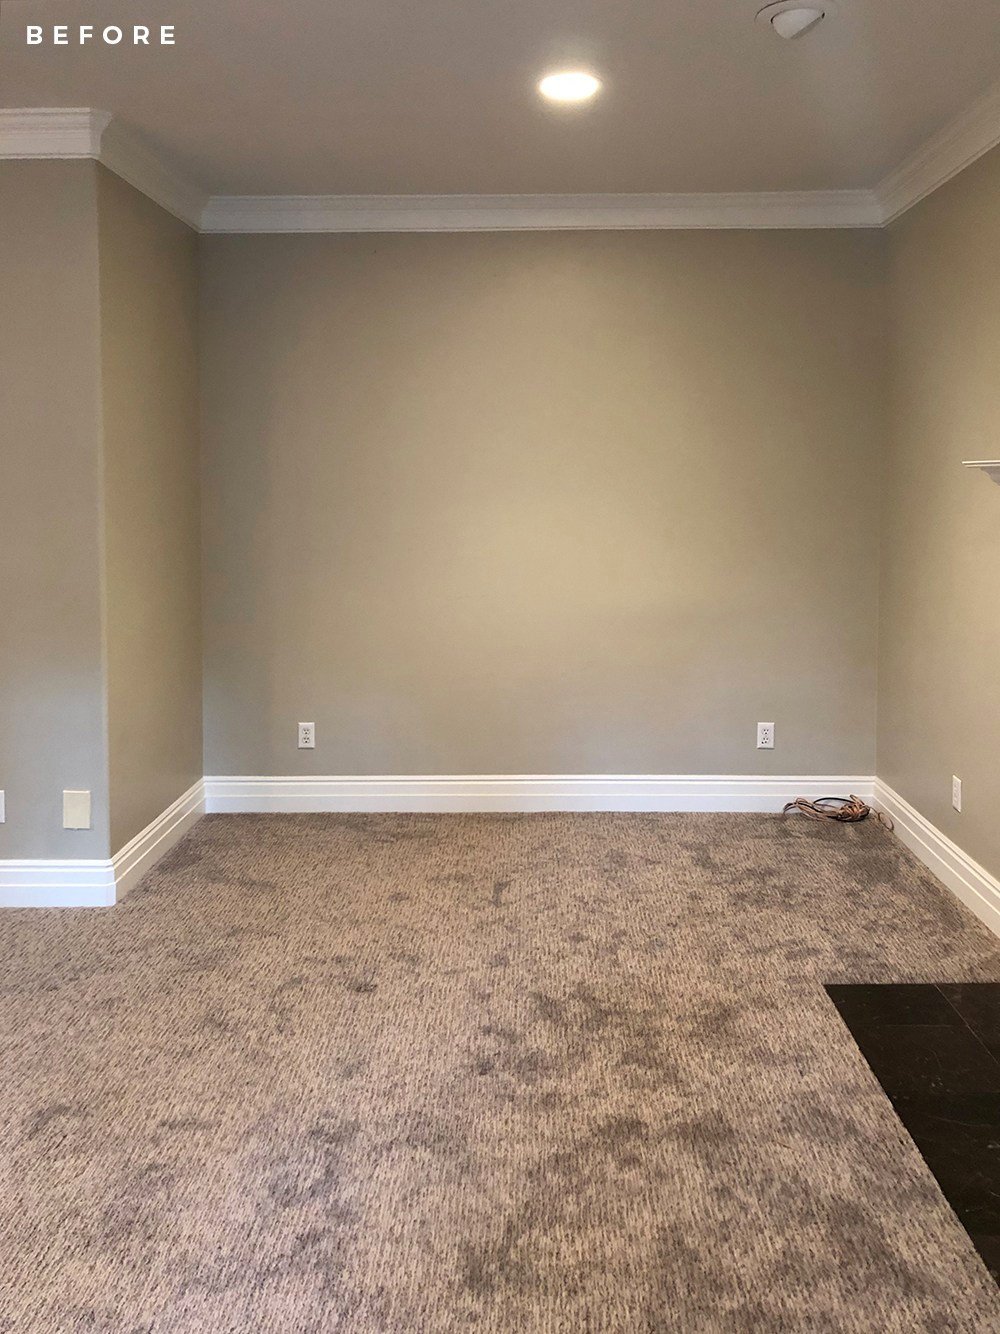 Formal Living Room Updates - roomfortuesday.com